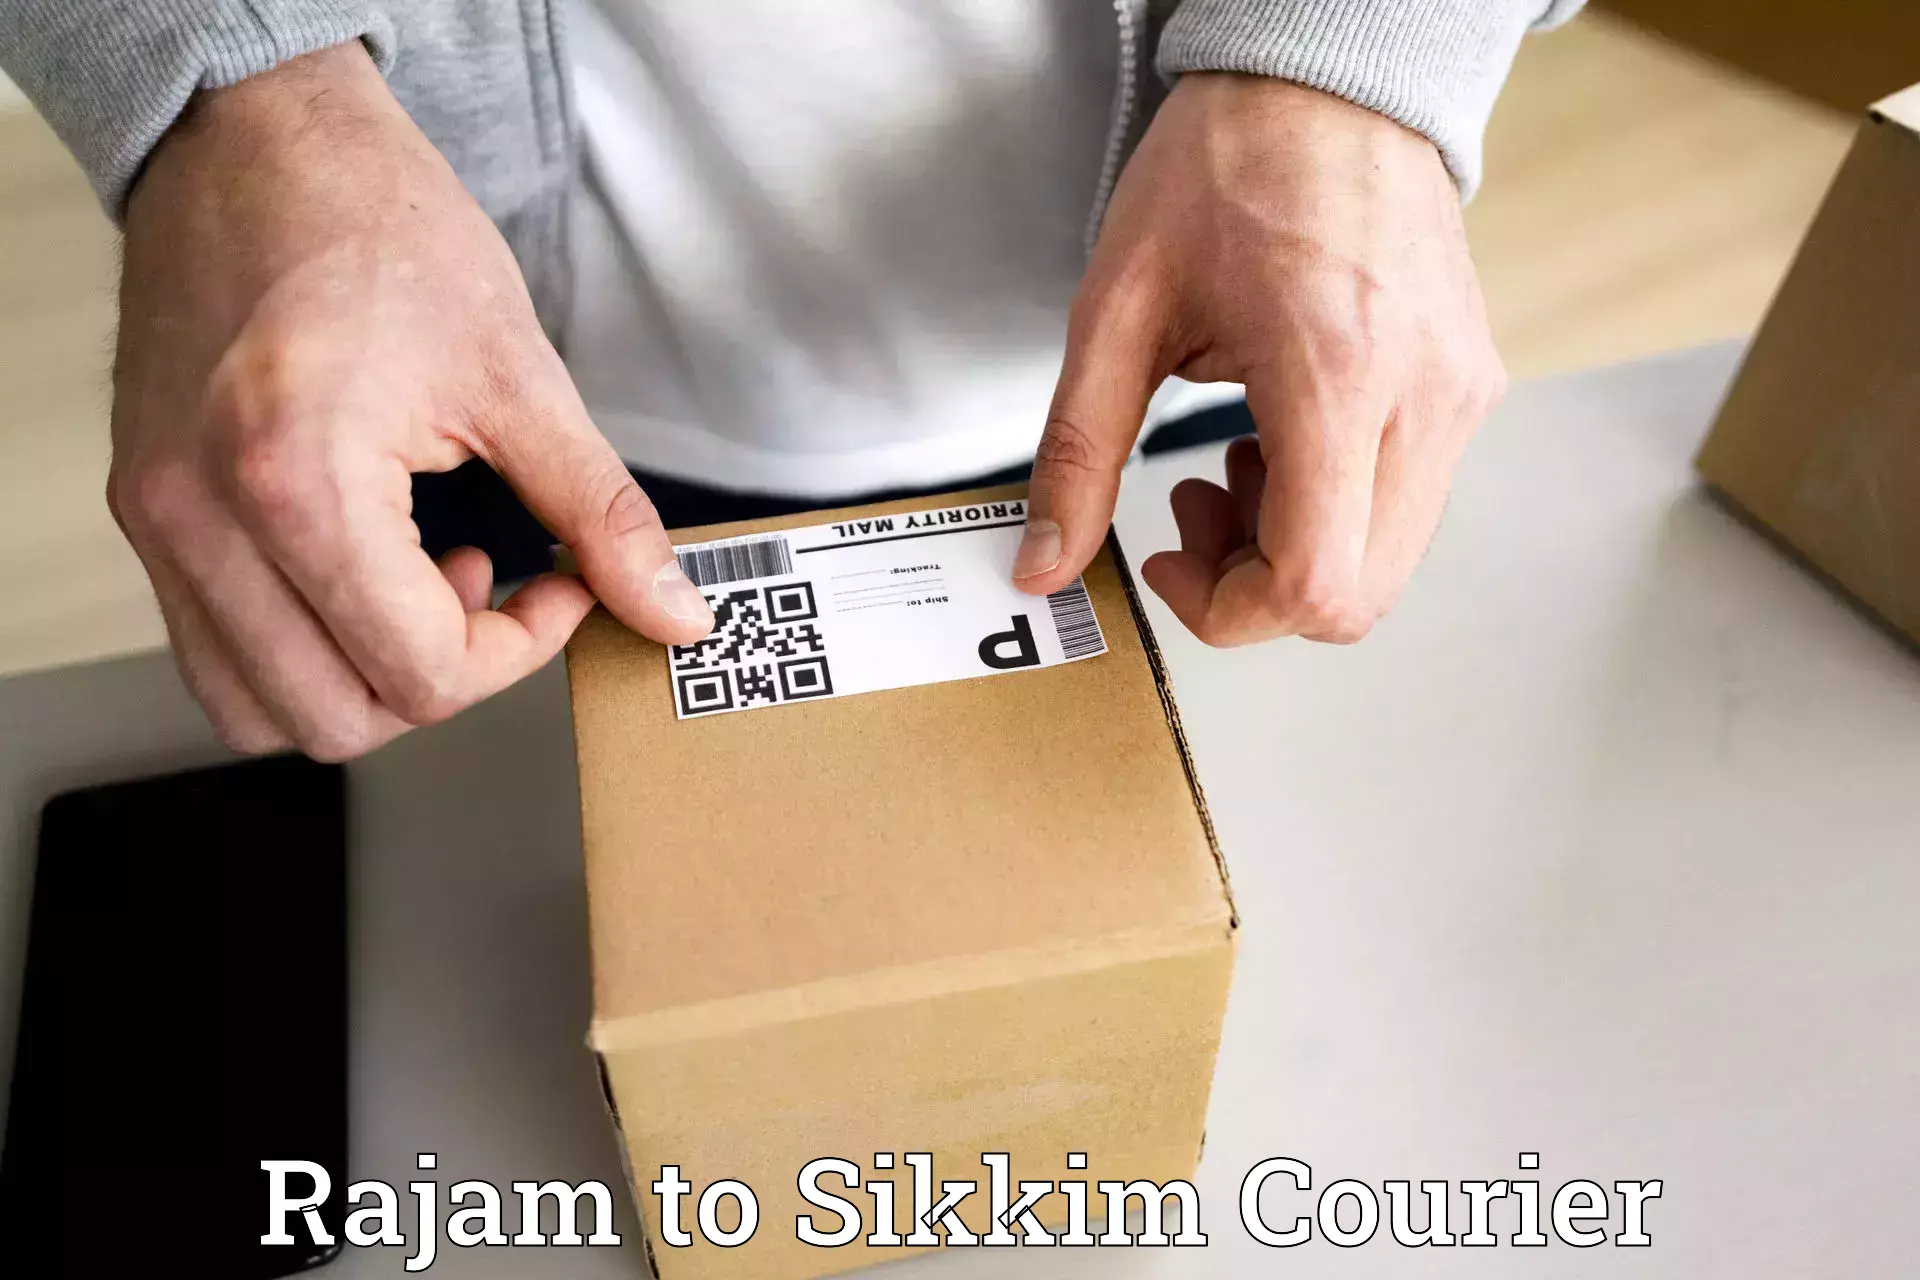 Efficient courier operations Rajam to Pelling